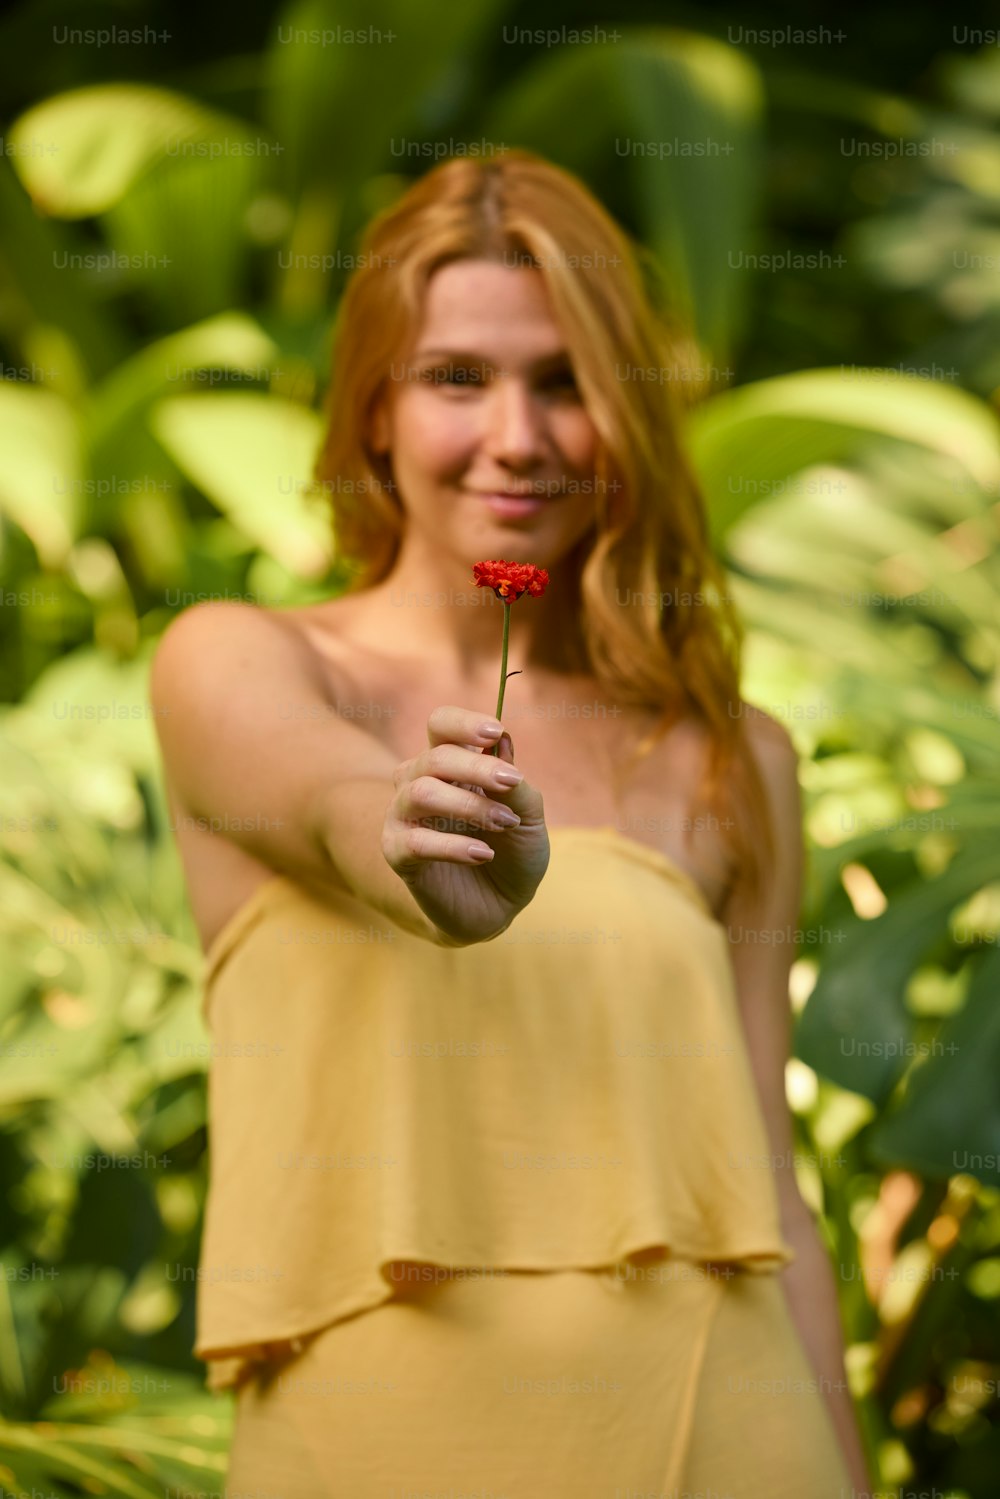 a woman in a yellow dress holding a red flower